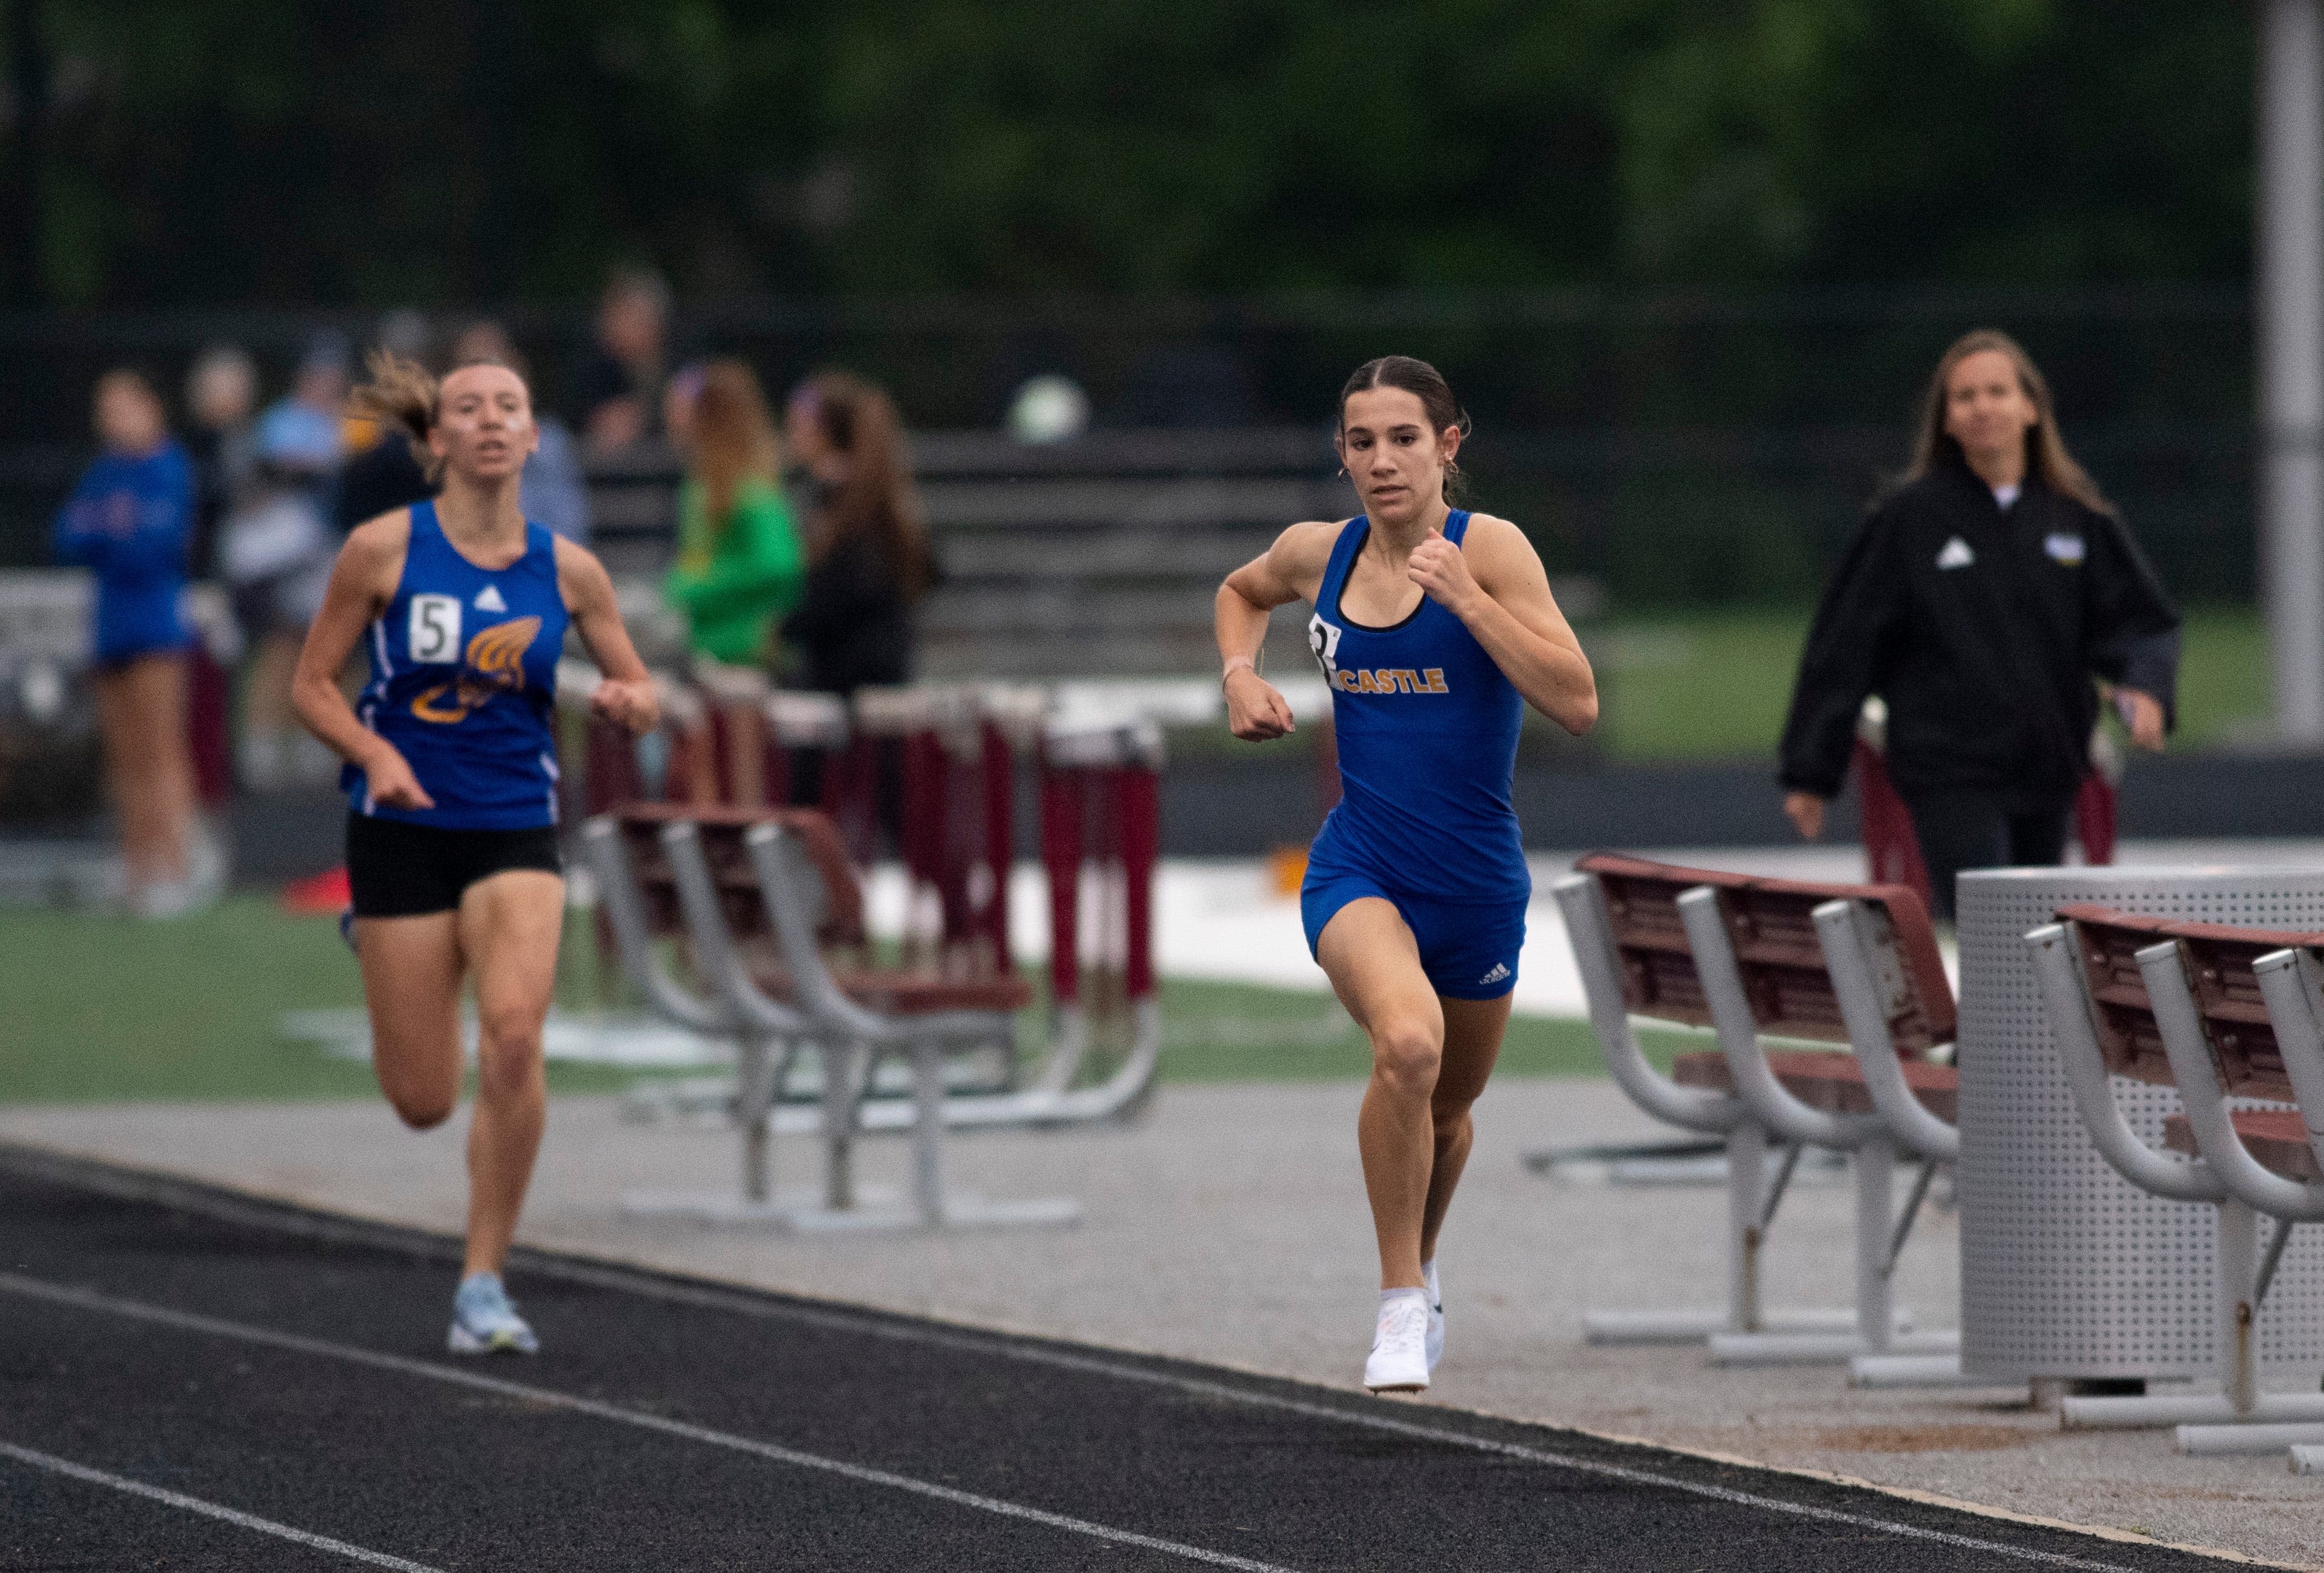 New champions, more dominance: What we learned from the Mount Vernon girls track sectional